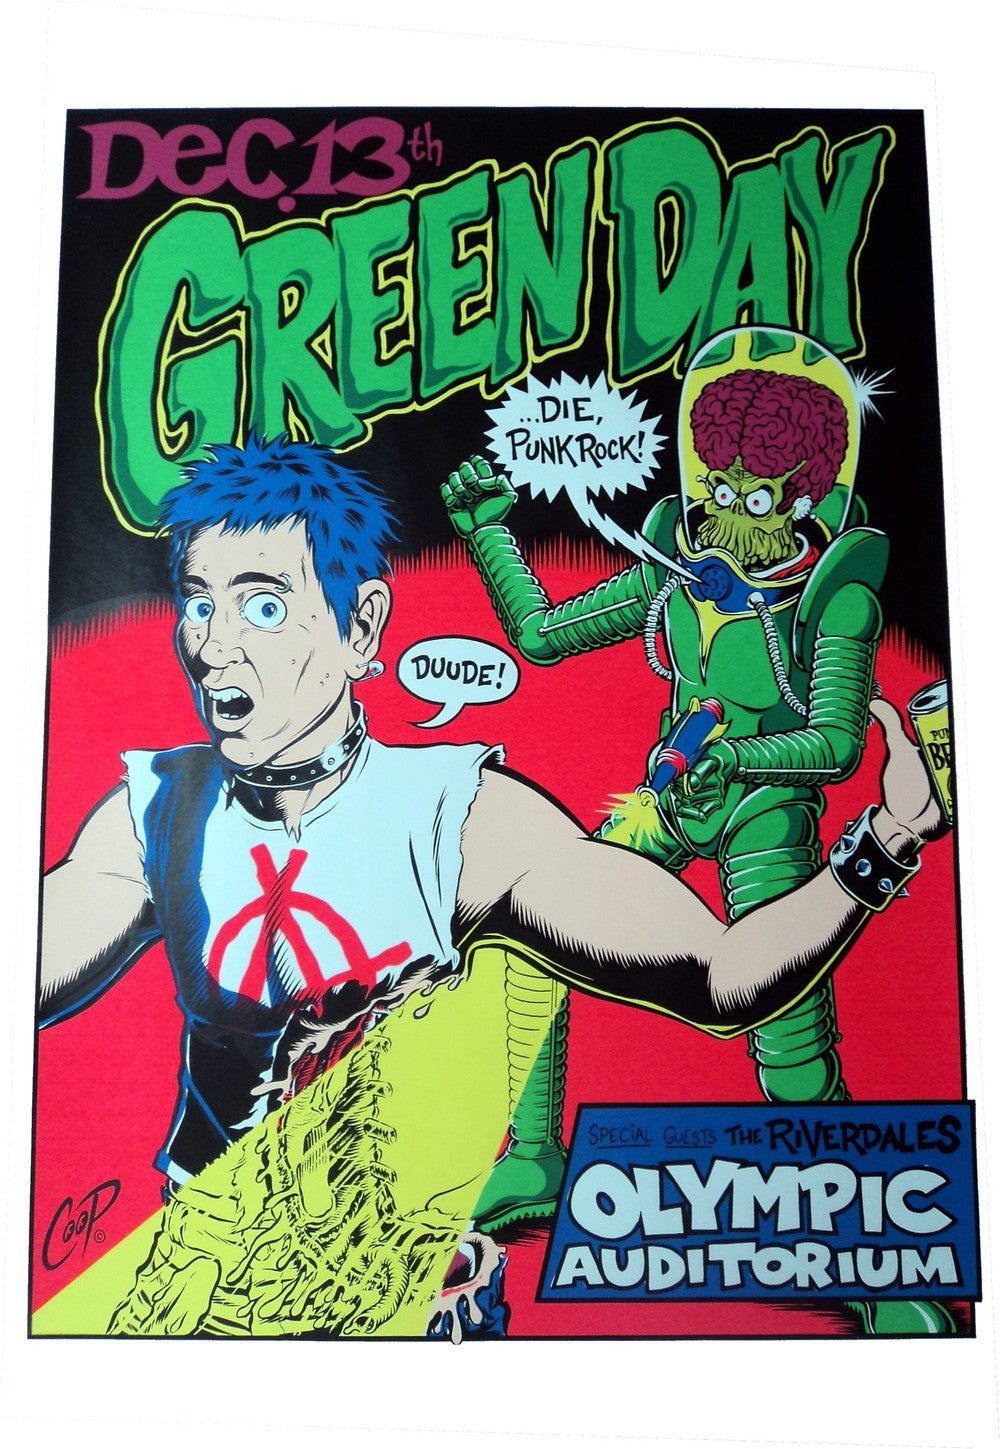 Coop - 1995 - Green Day Concert Poster